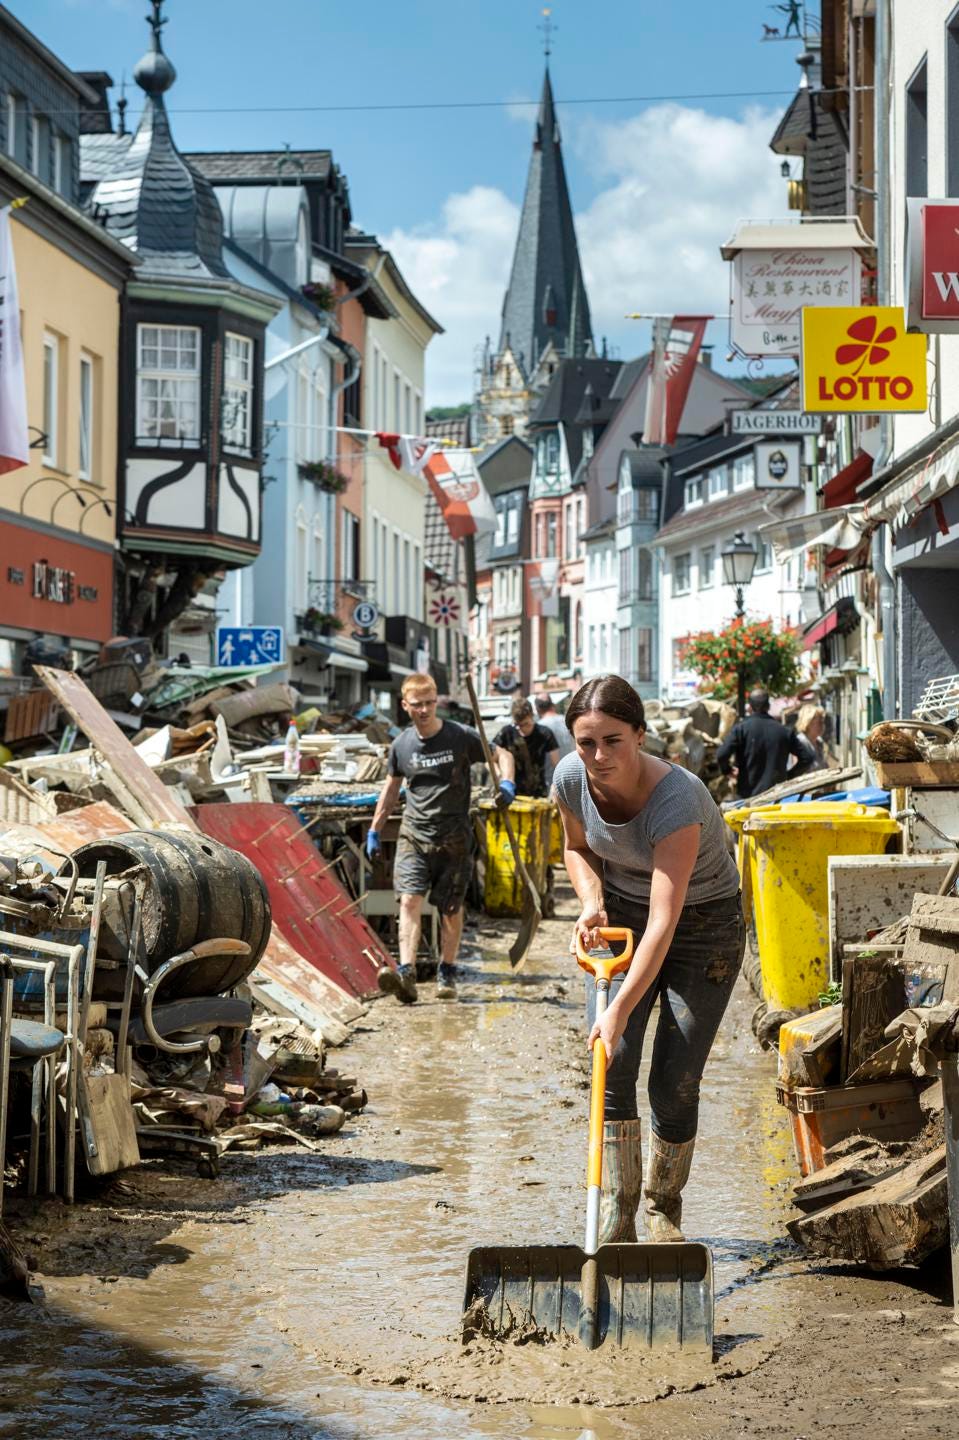 The floods in Europe that killed over 150 people in recent days were a result of climate change, many people say. “Deadly Floods Show World Unprepar